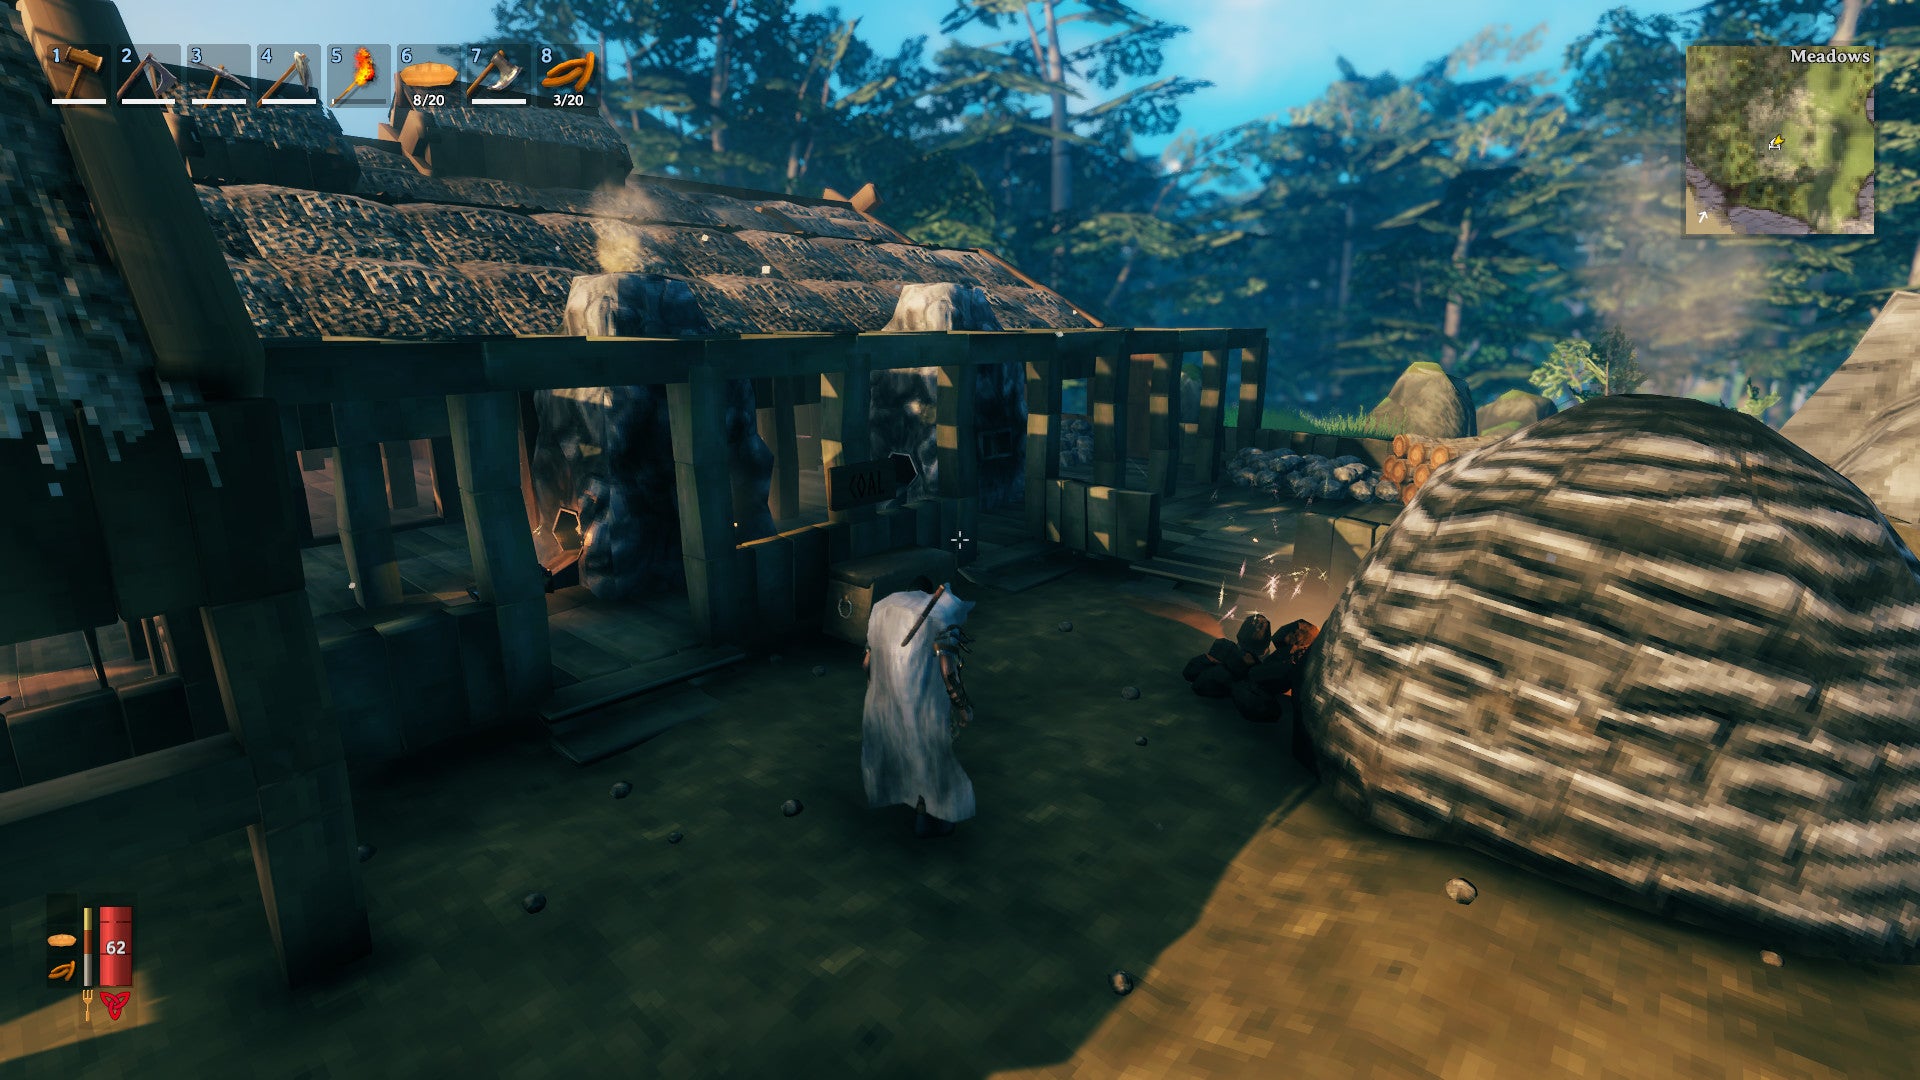 A Valheim screenshot of a player clad in a Wolf Cloak, walking towards the smelting area of a settlement.